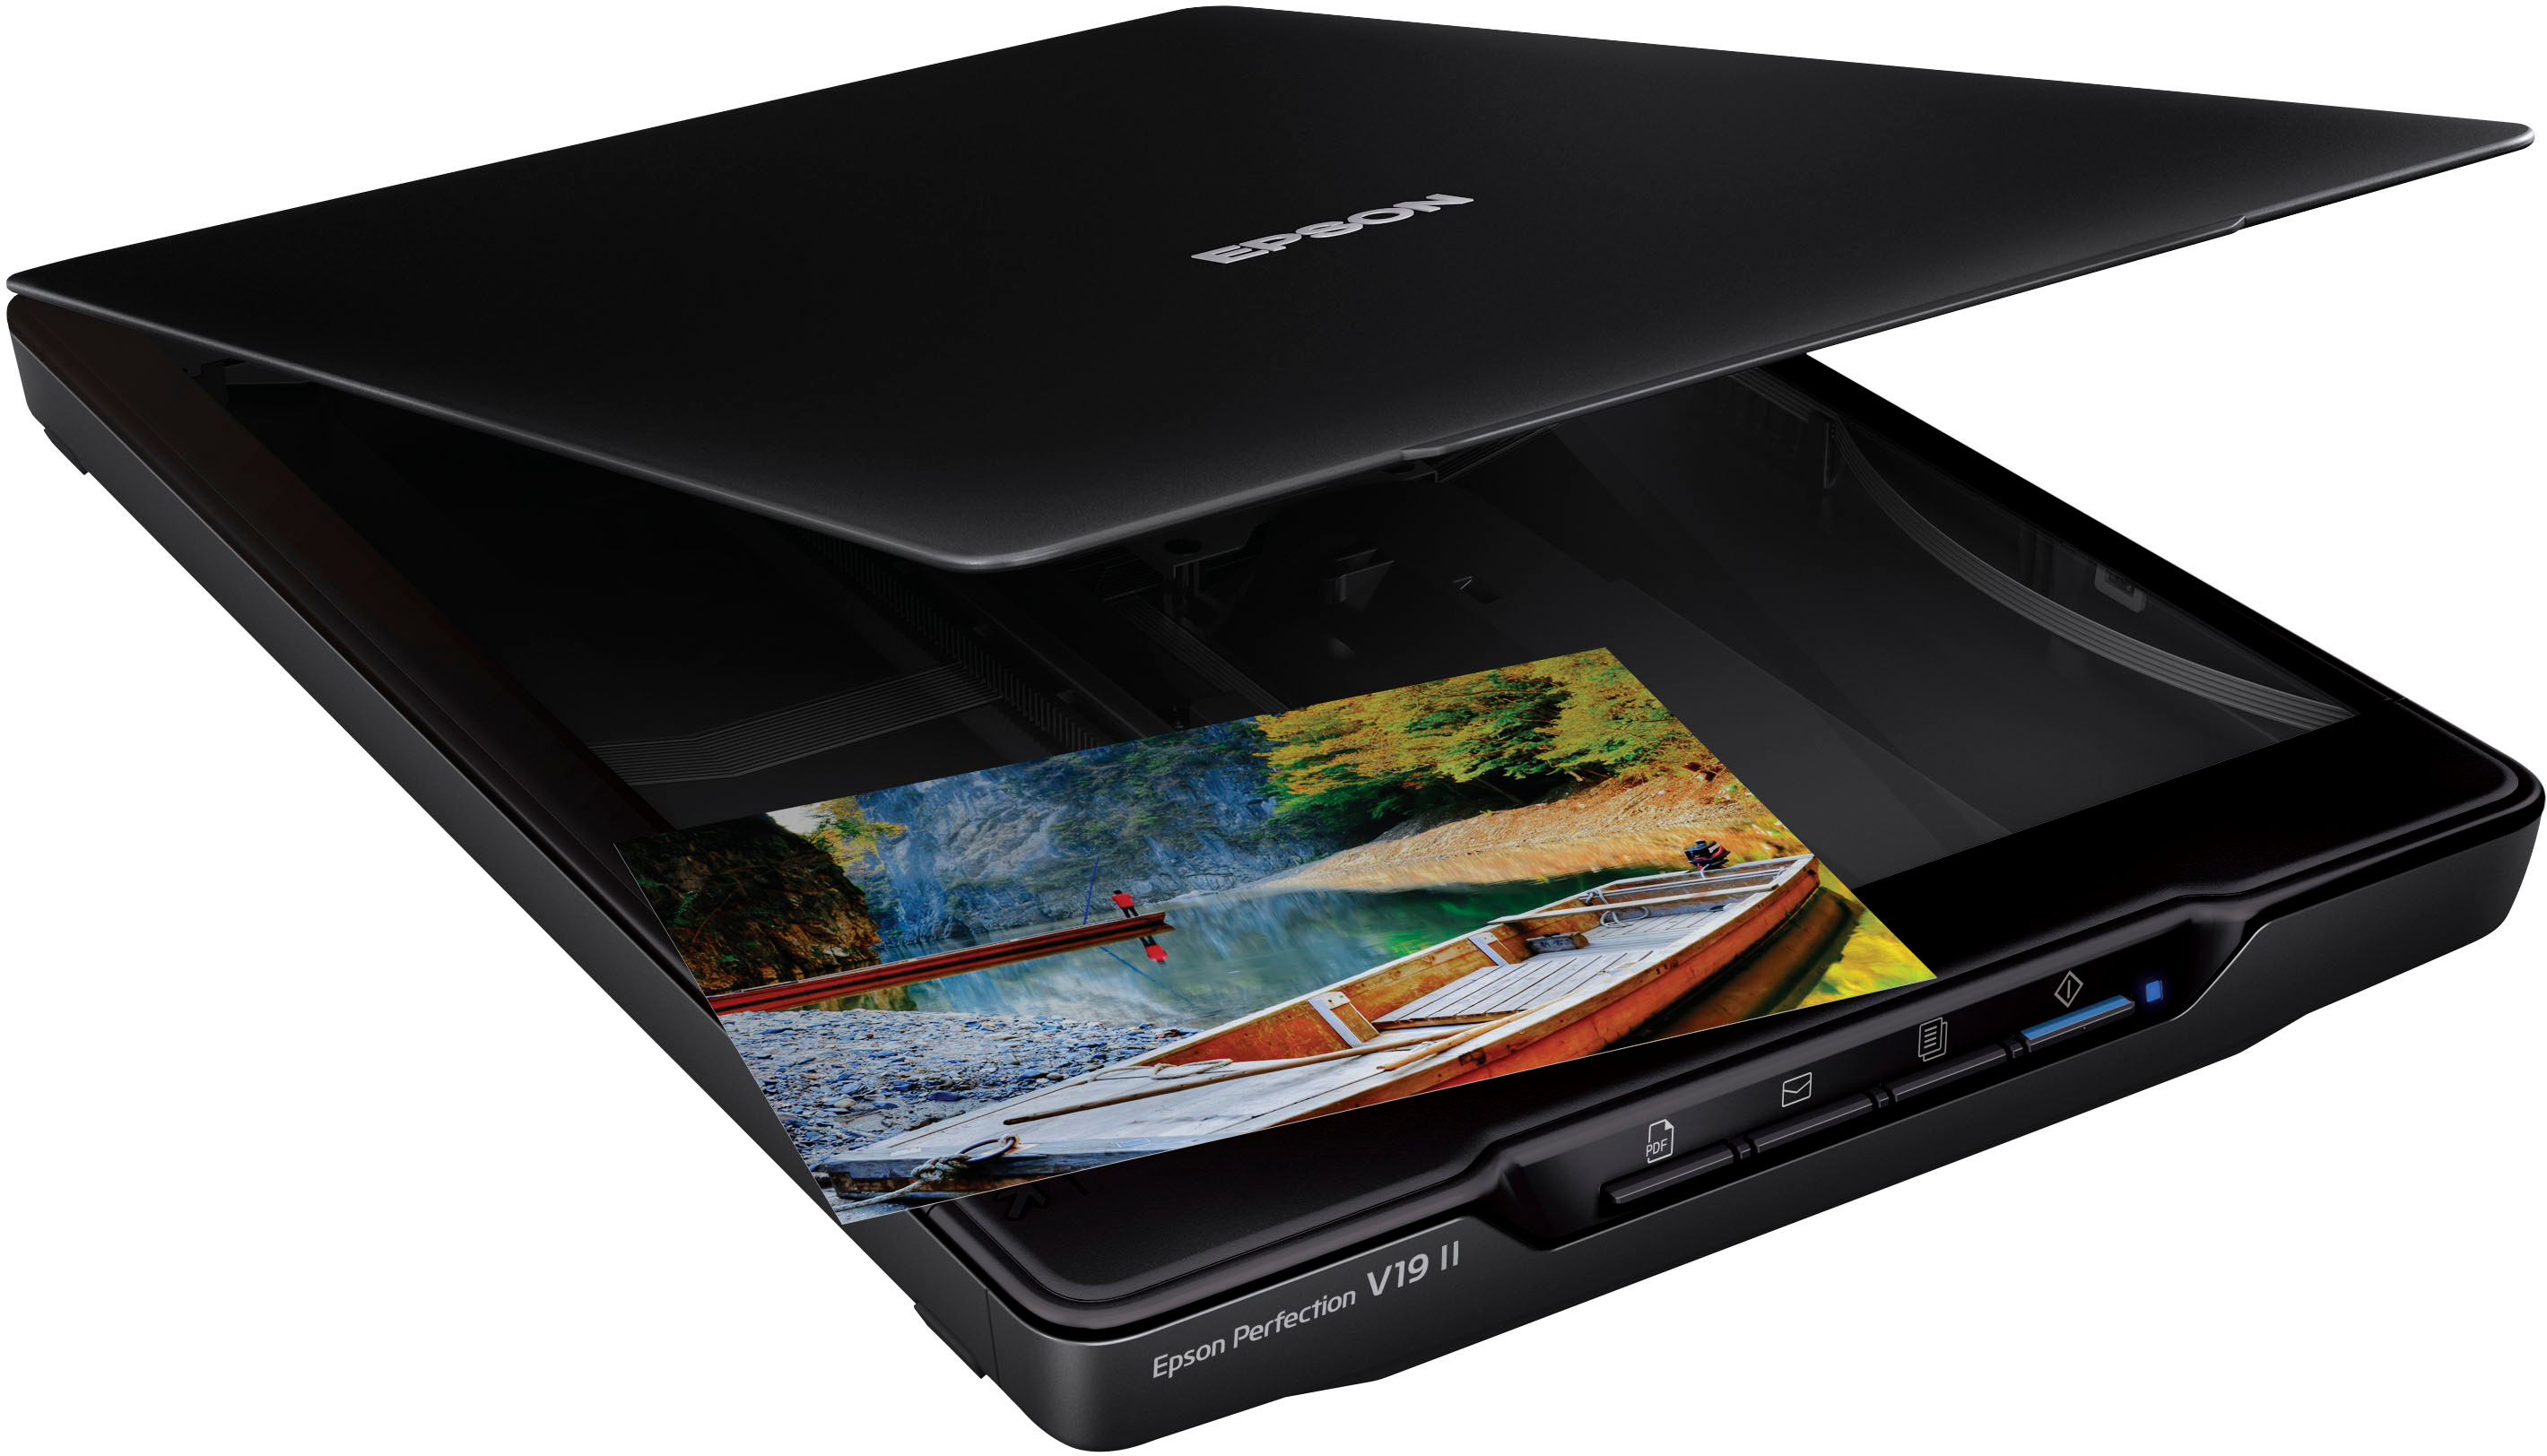 Angle View: Epson - Perfection V19 II Color Photo and Document Flatbed Scanner